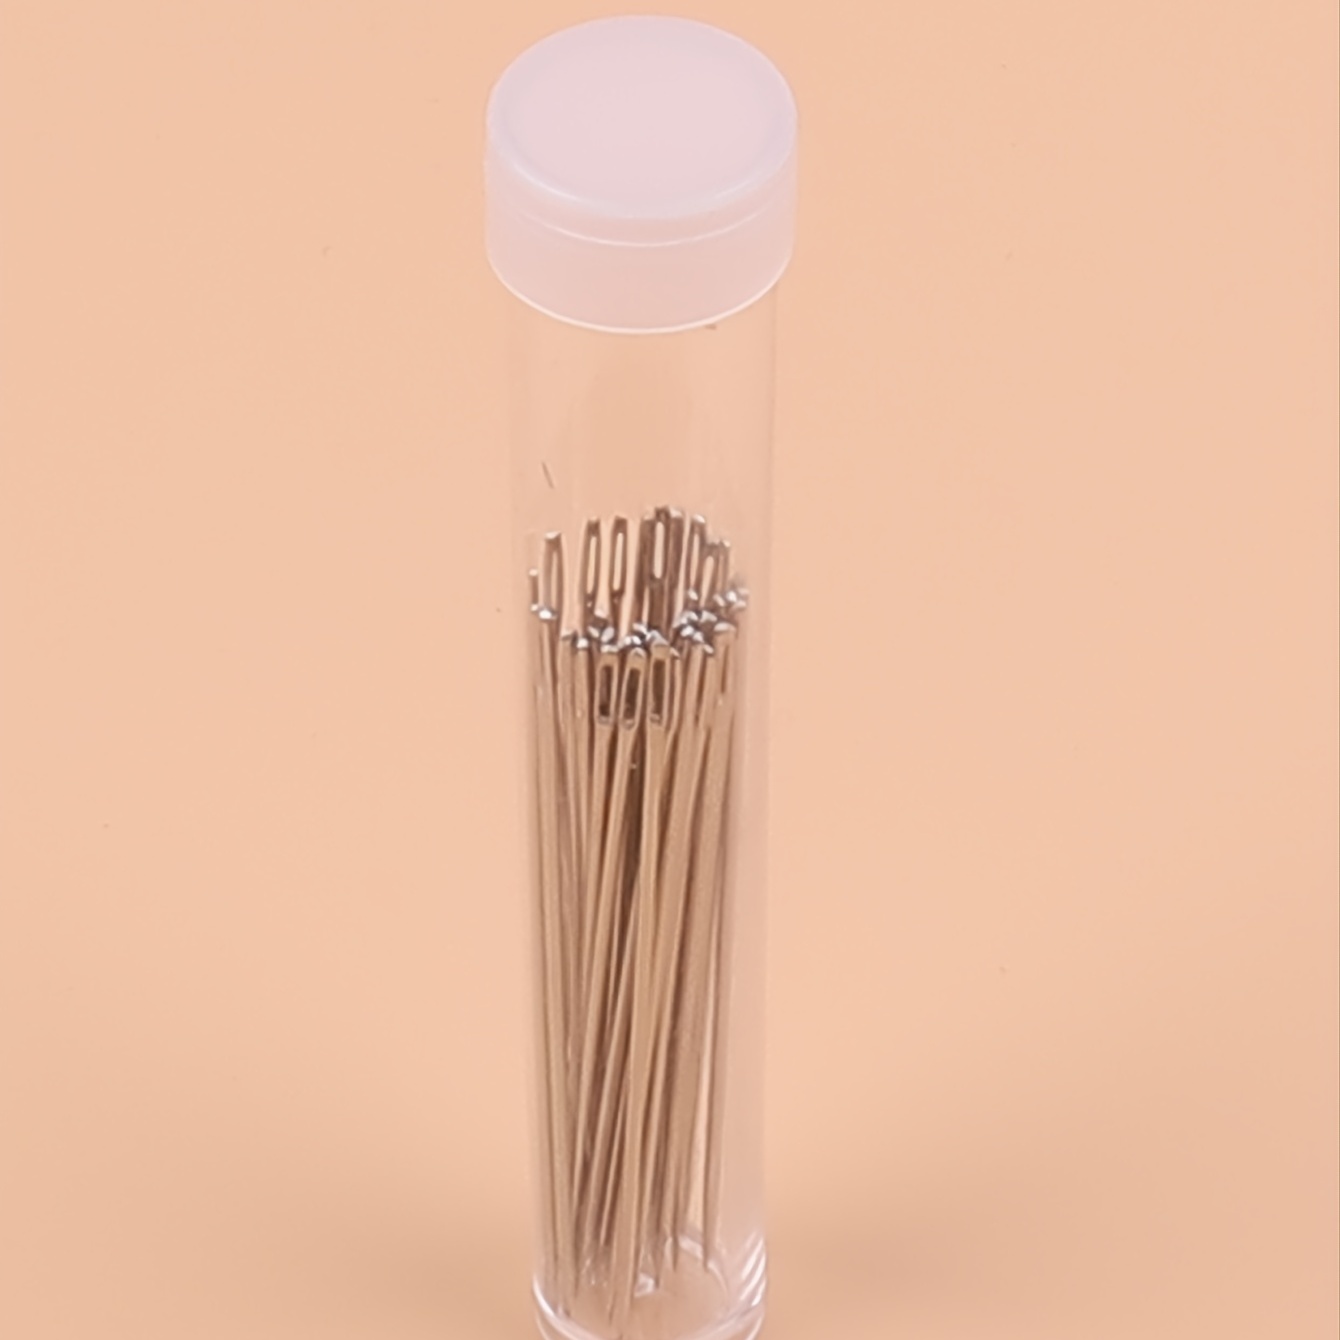 25pcs/set Large-Eye Needles Stitching Needles Big Eye Hand Sewing Needles  In Clear Storage Tube For Stitching, Sewing And Crafting